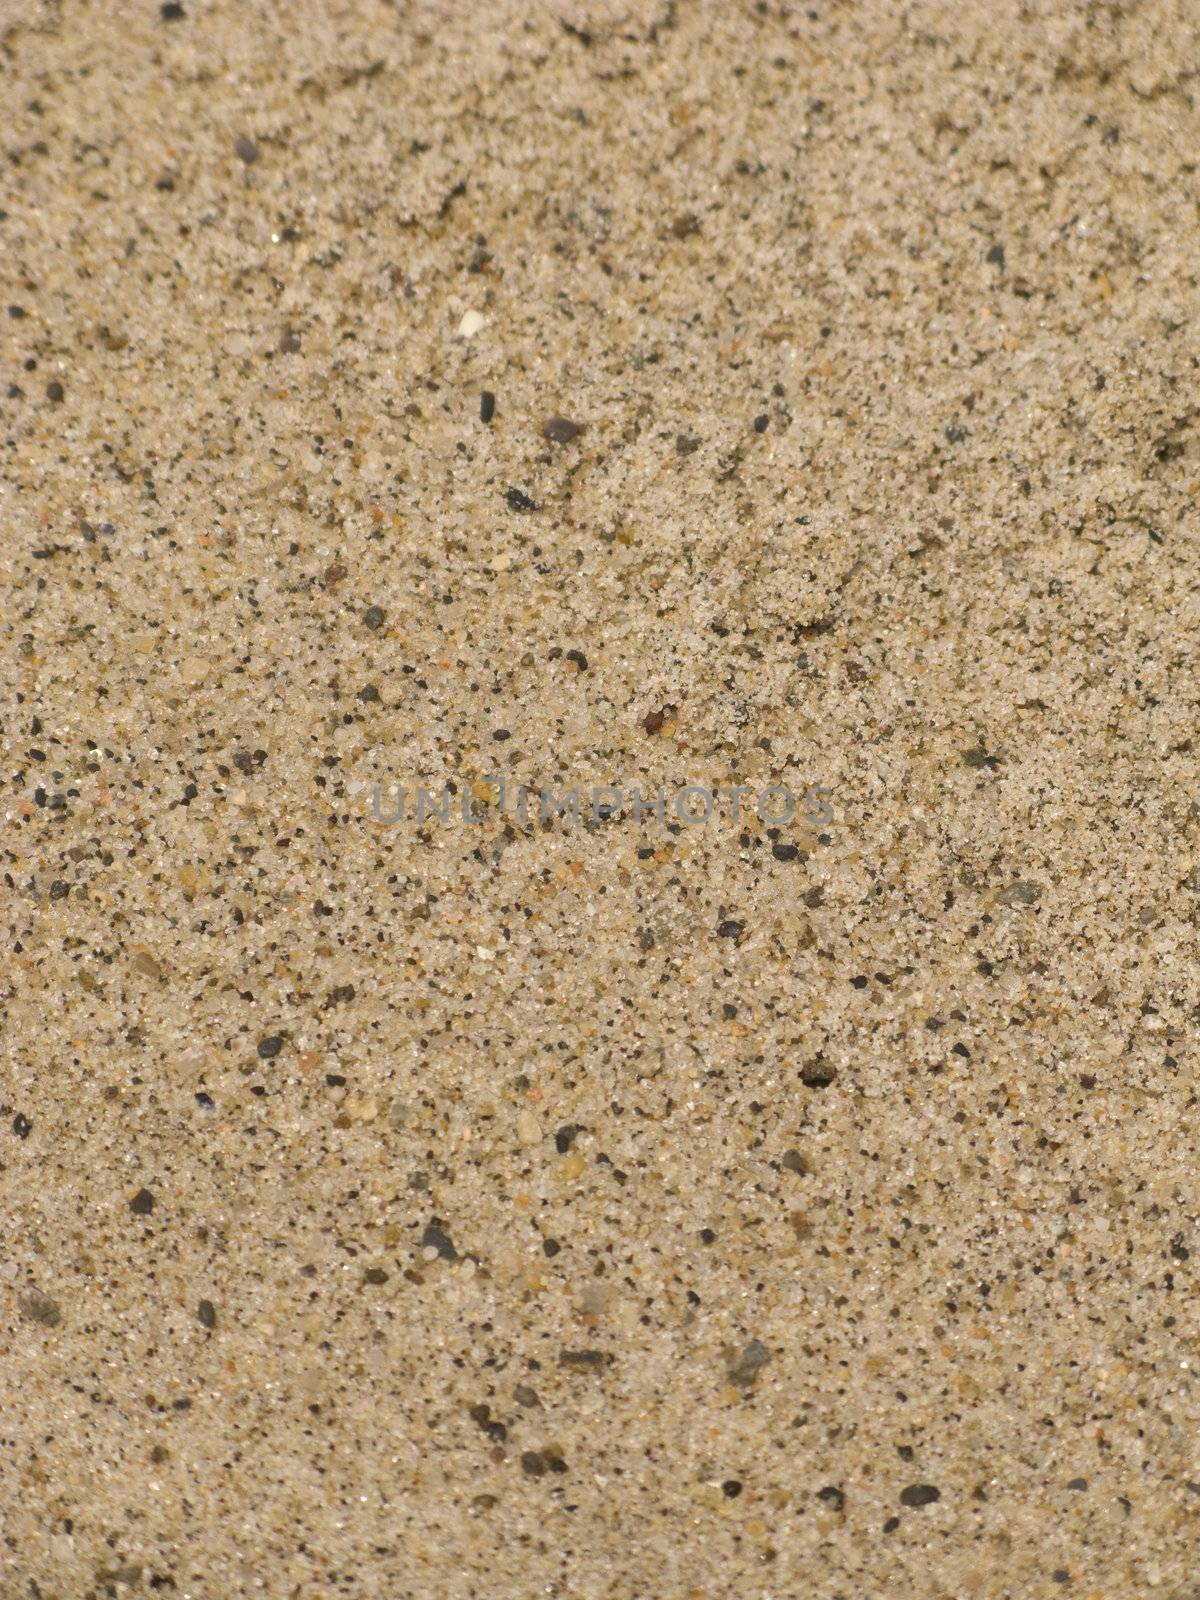 Natural Sand Texture from the Beach